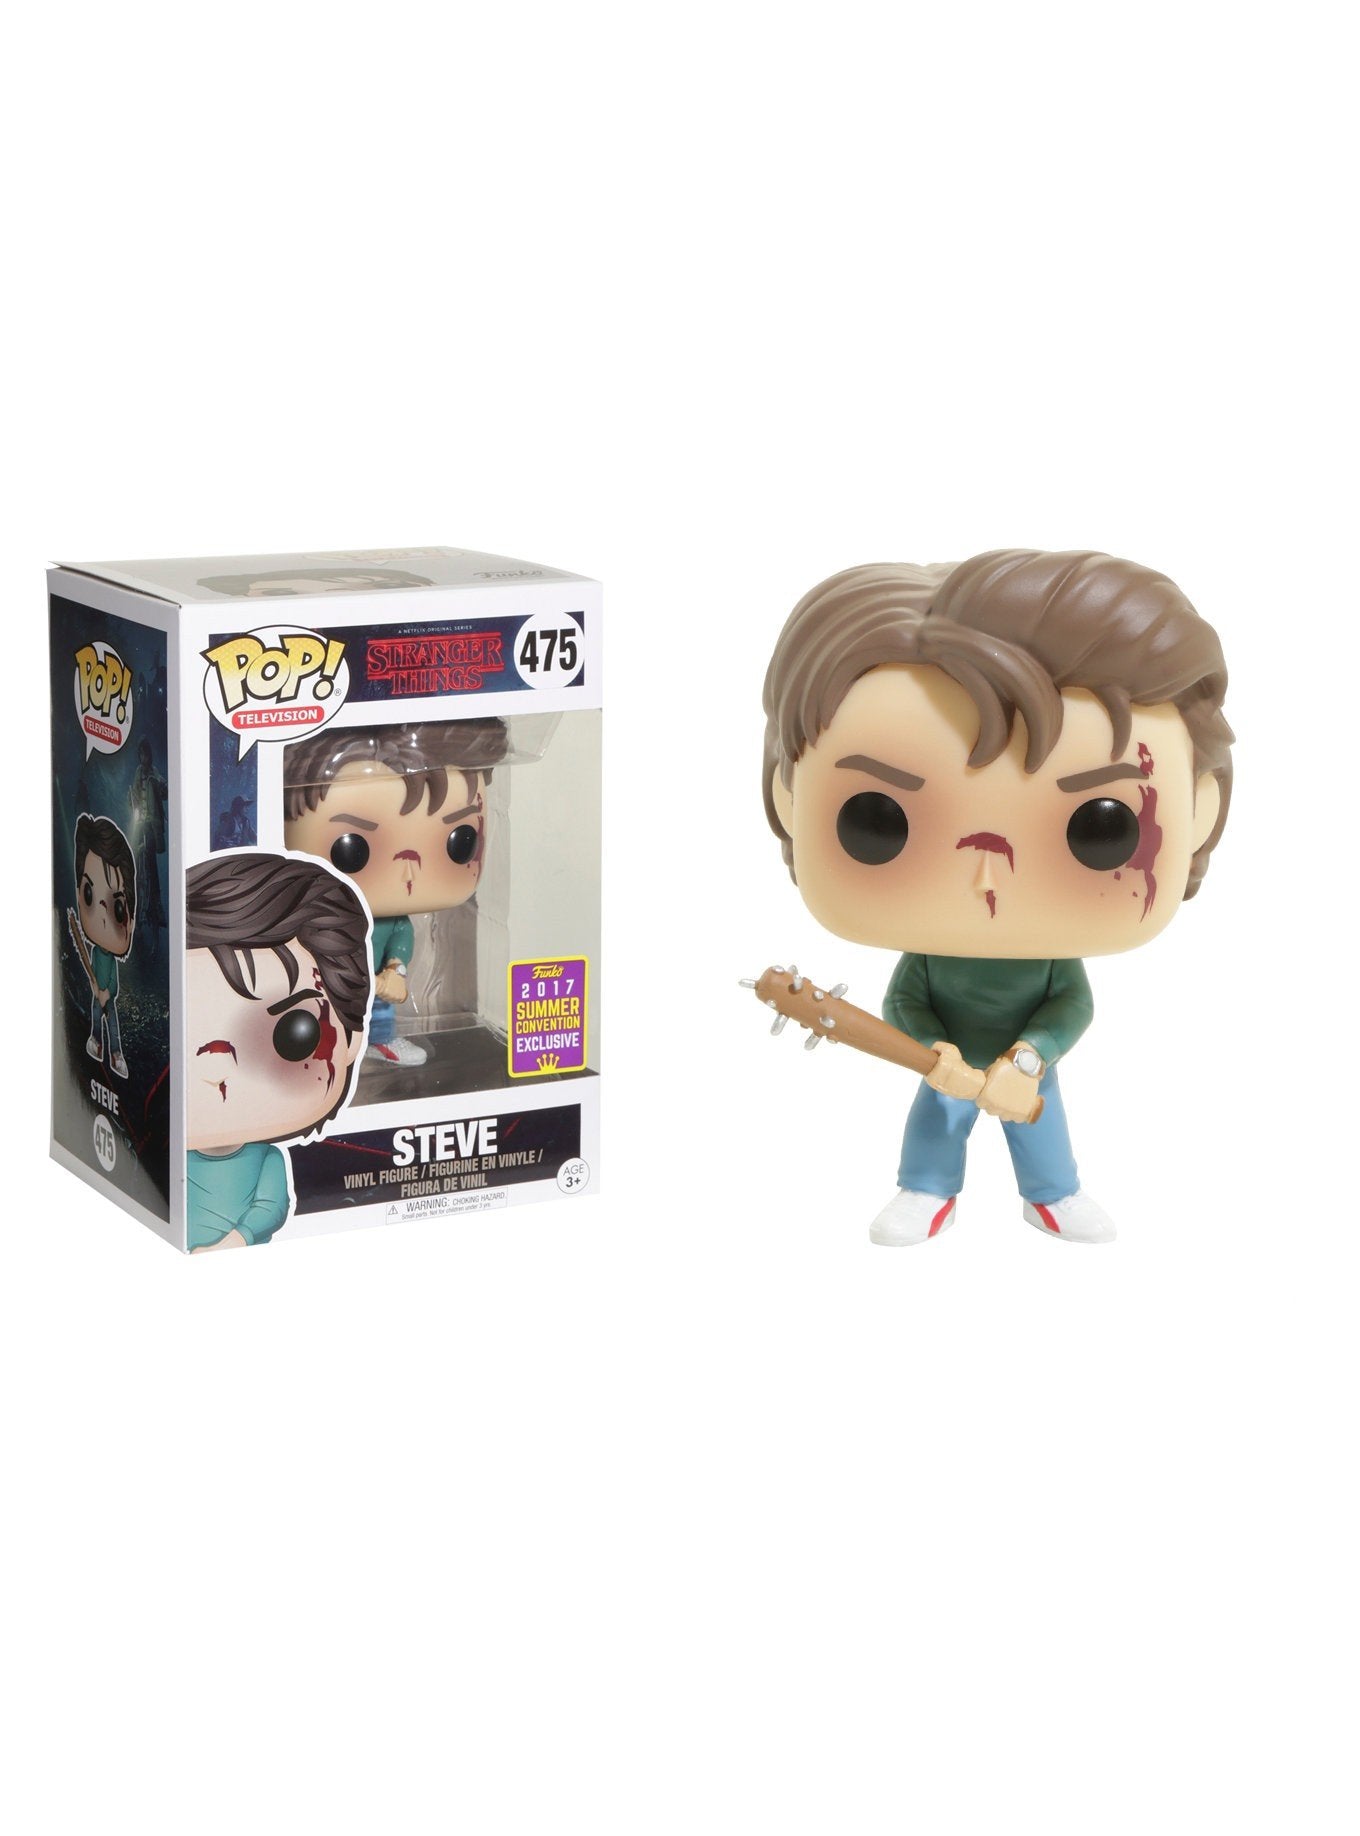 Funko POP! Television Stranger Things - Steve SDCC 2017 Exclusive